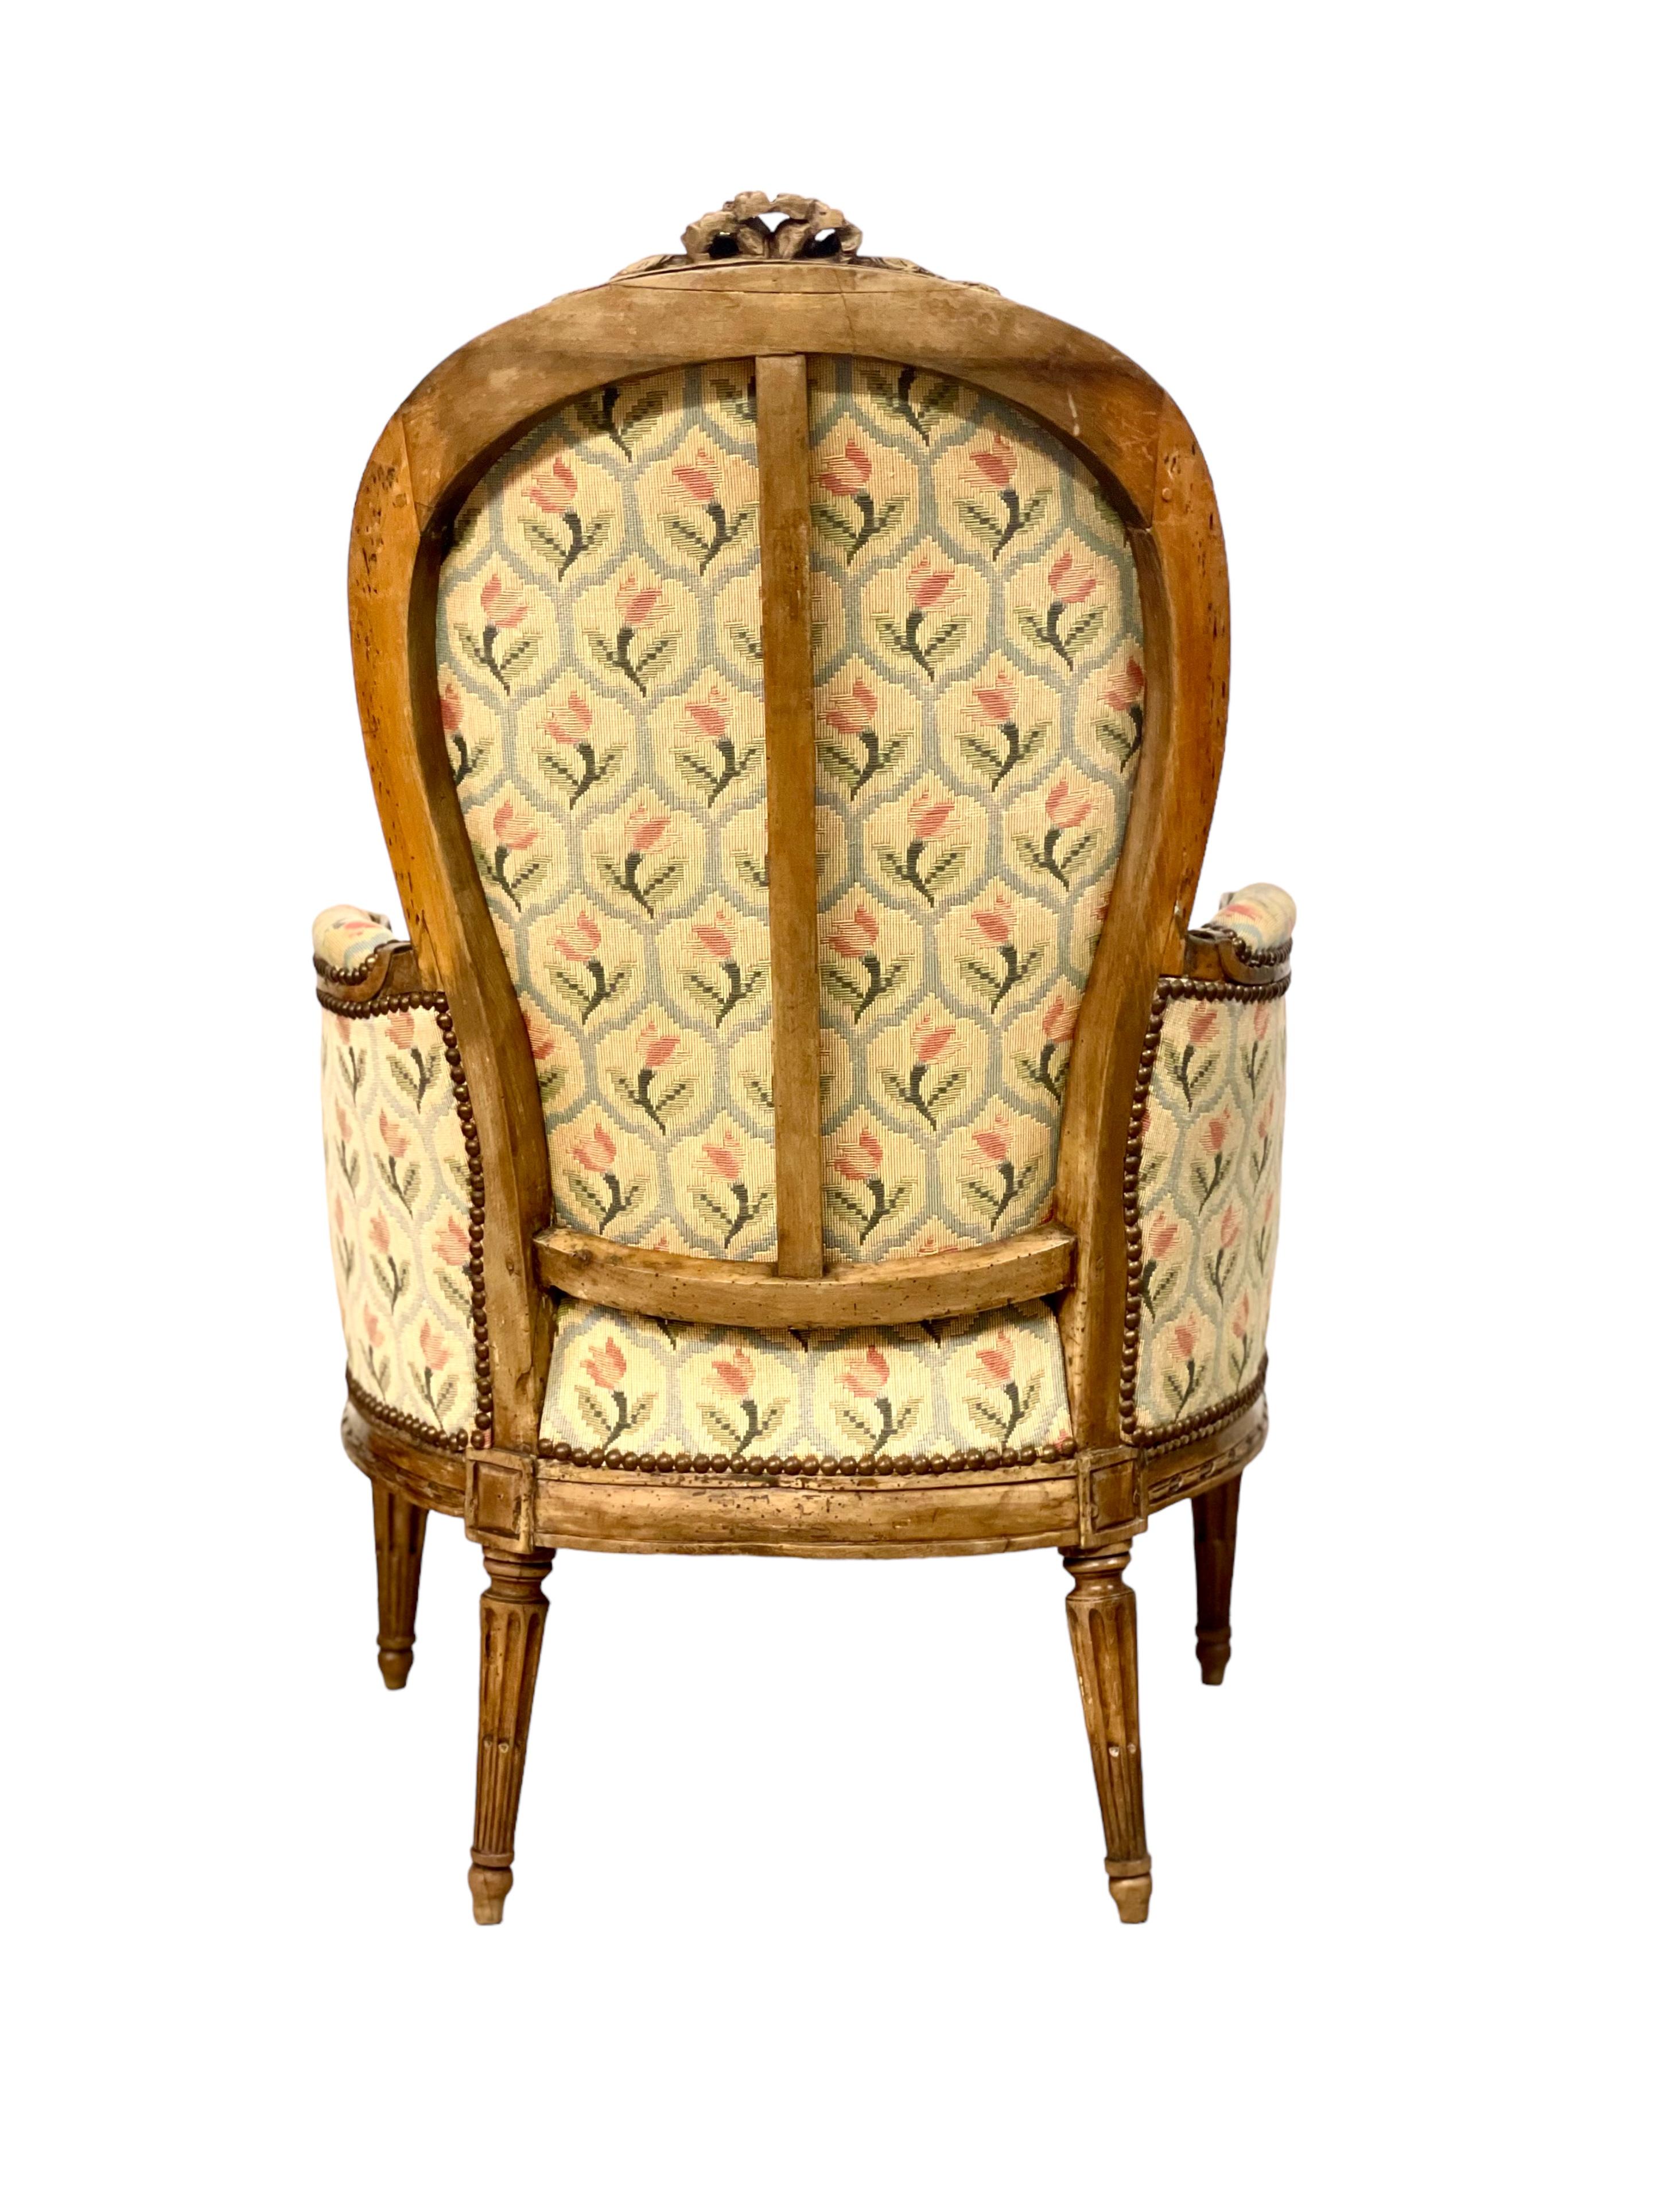 Louis XVI Period Bergere Chair 18th Century  For Sale 6